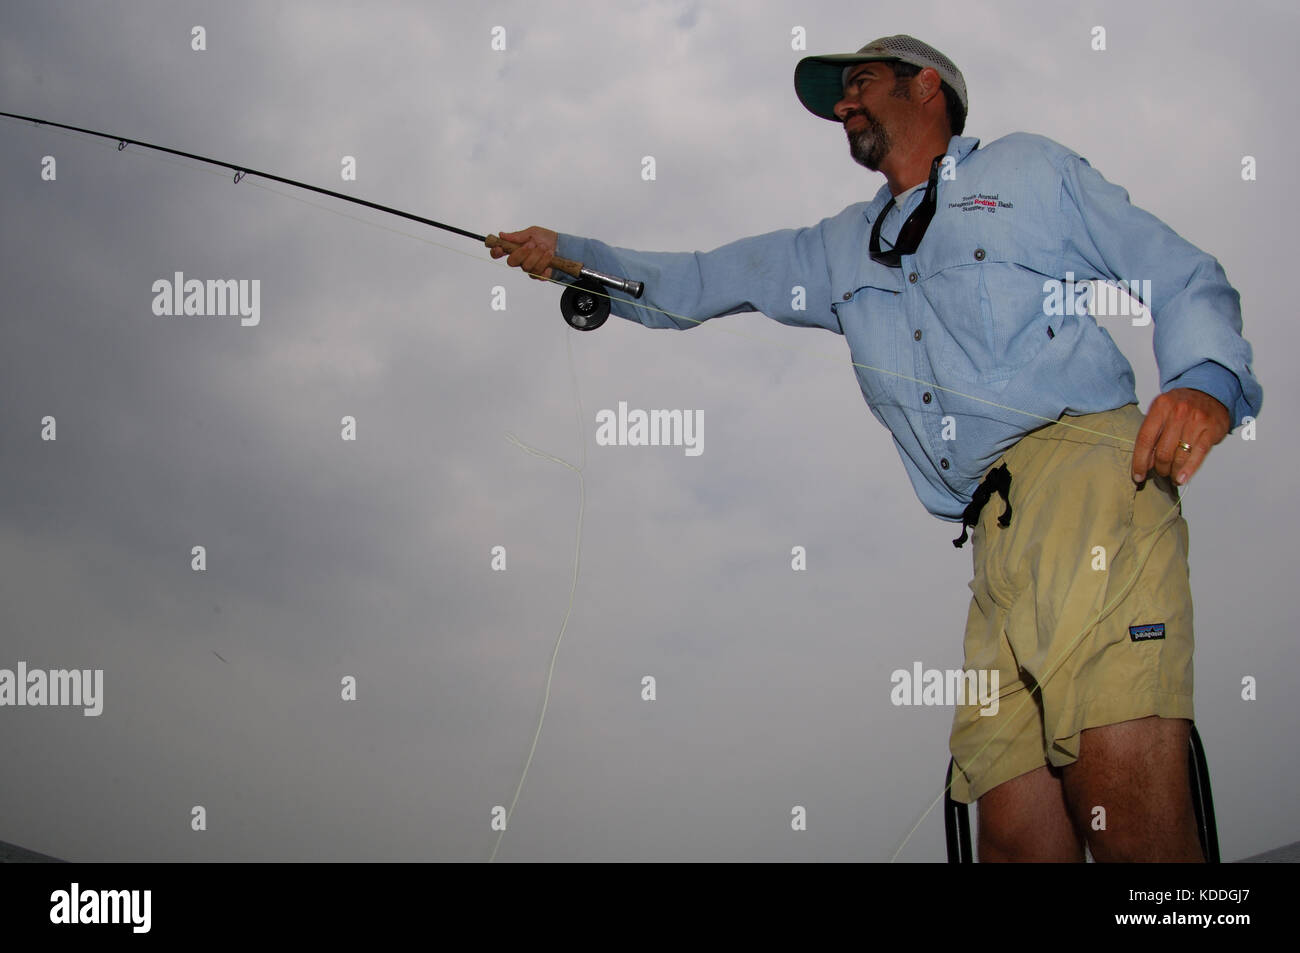 A fisherman casts a fly rod for redfish while fishing on the shallow flats of the Laguna Madre in South Texas Stock Photo